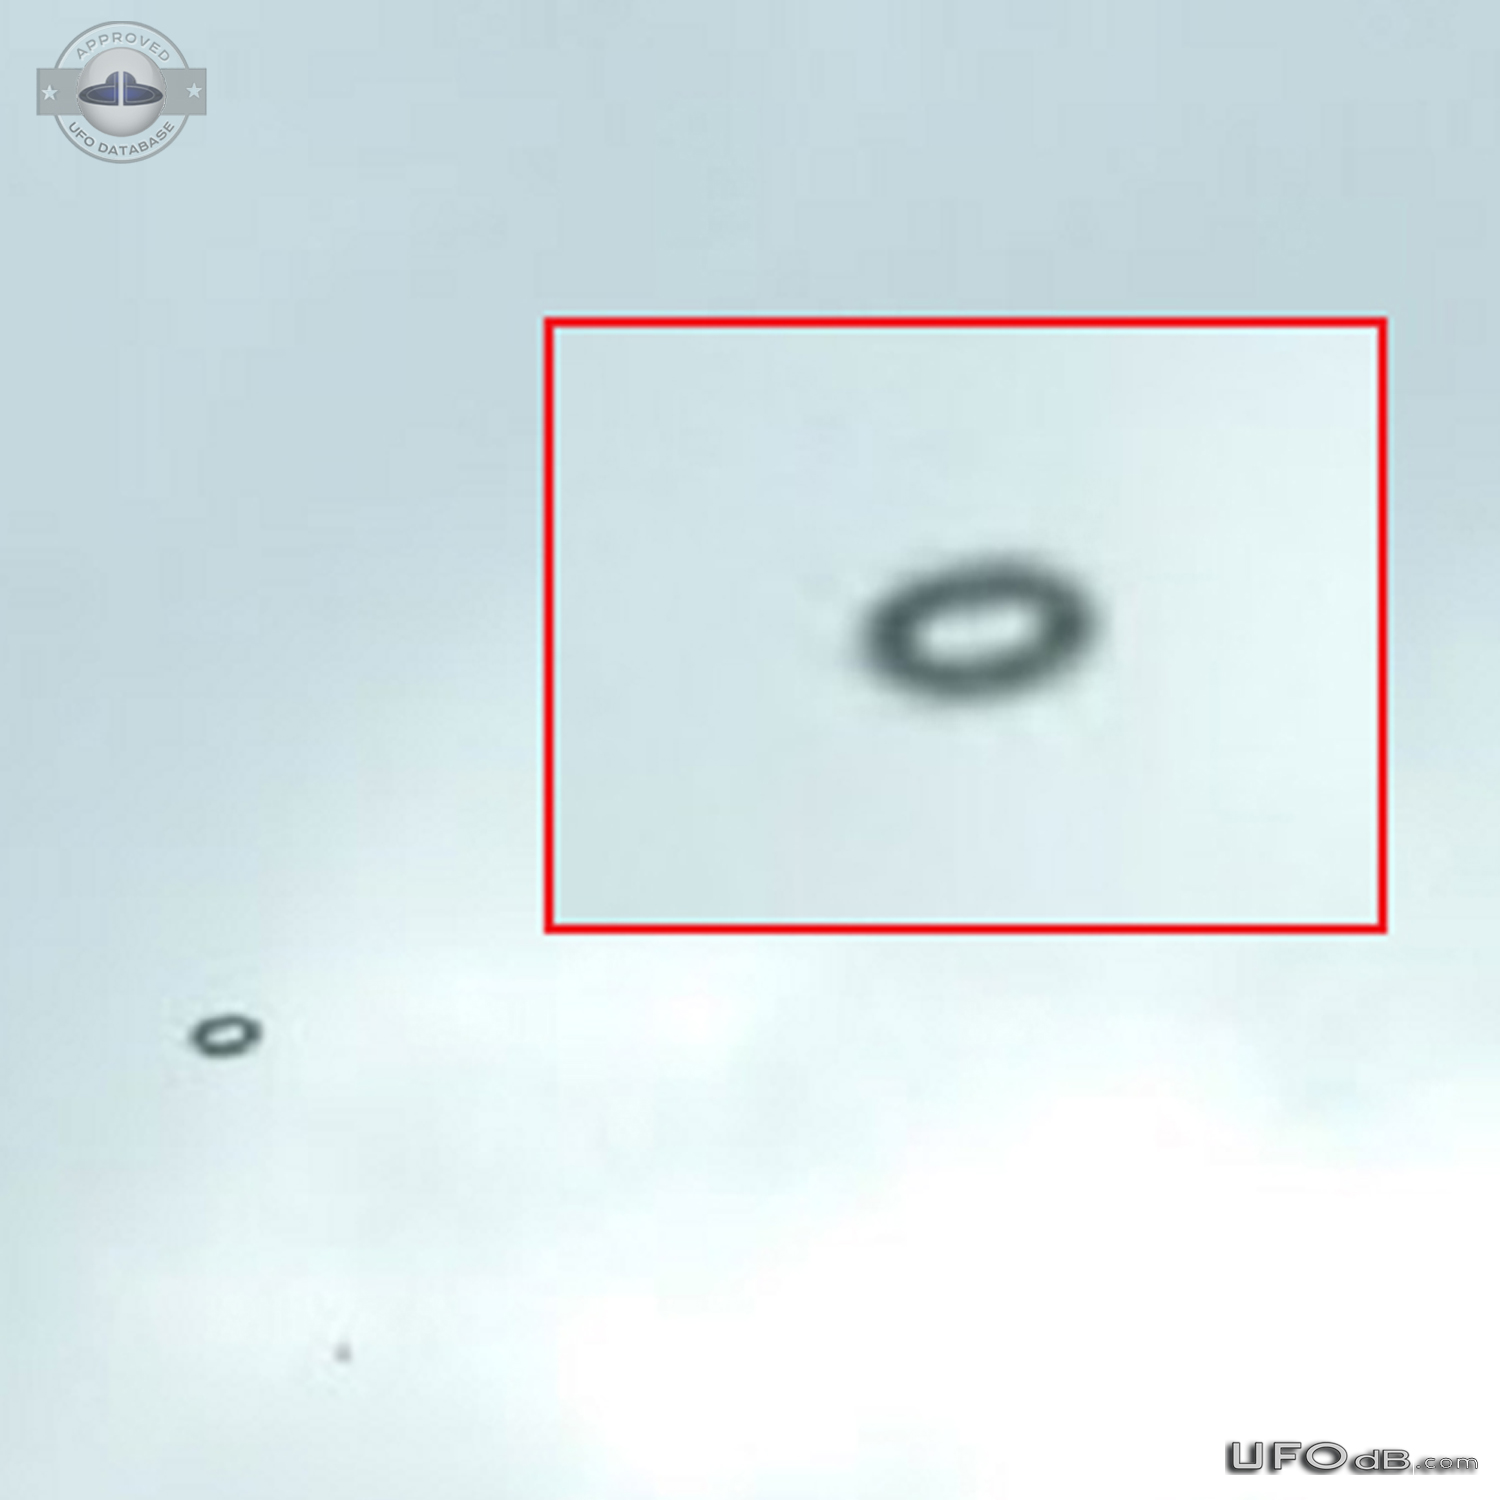 UK Ministry of Defence Helicopter Chases UFOs Above English Town UFO Picture #675-3